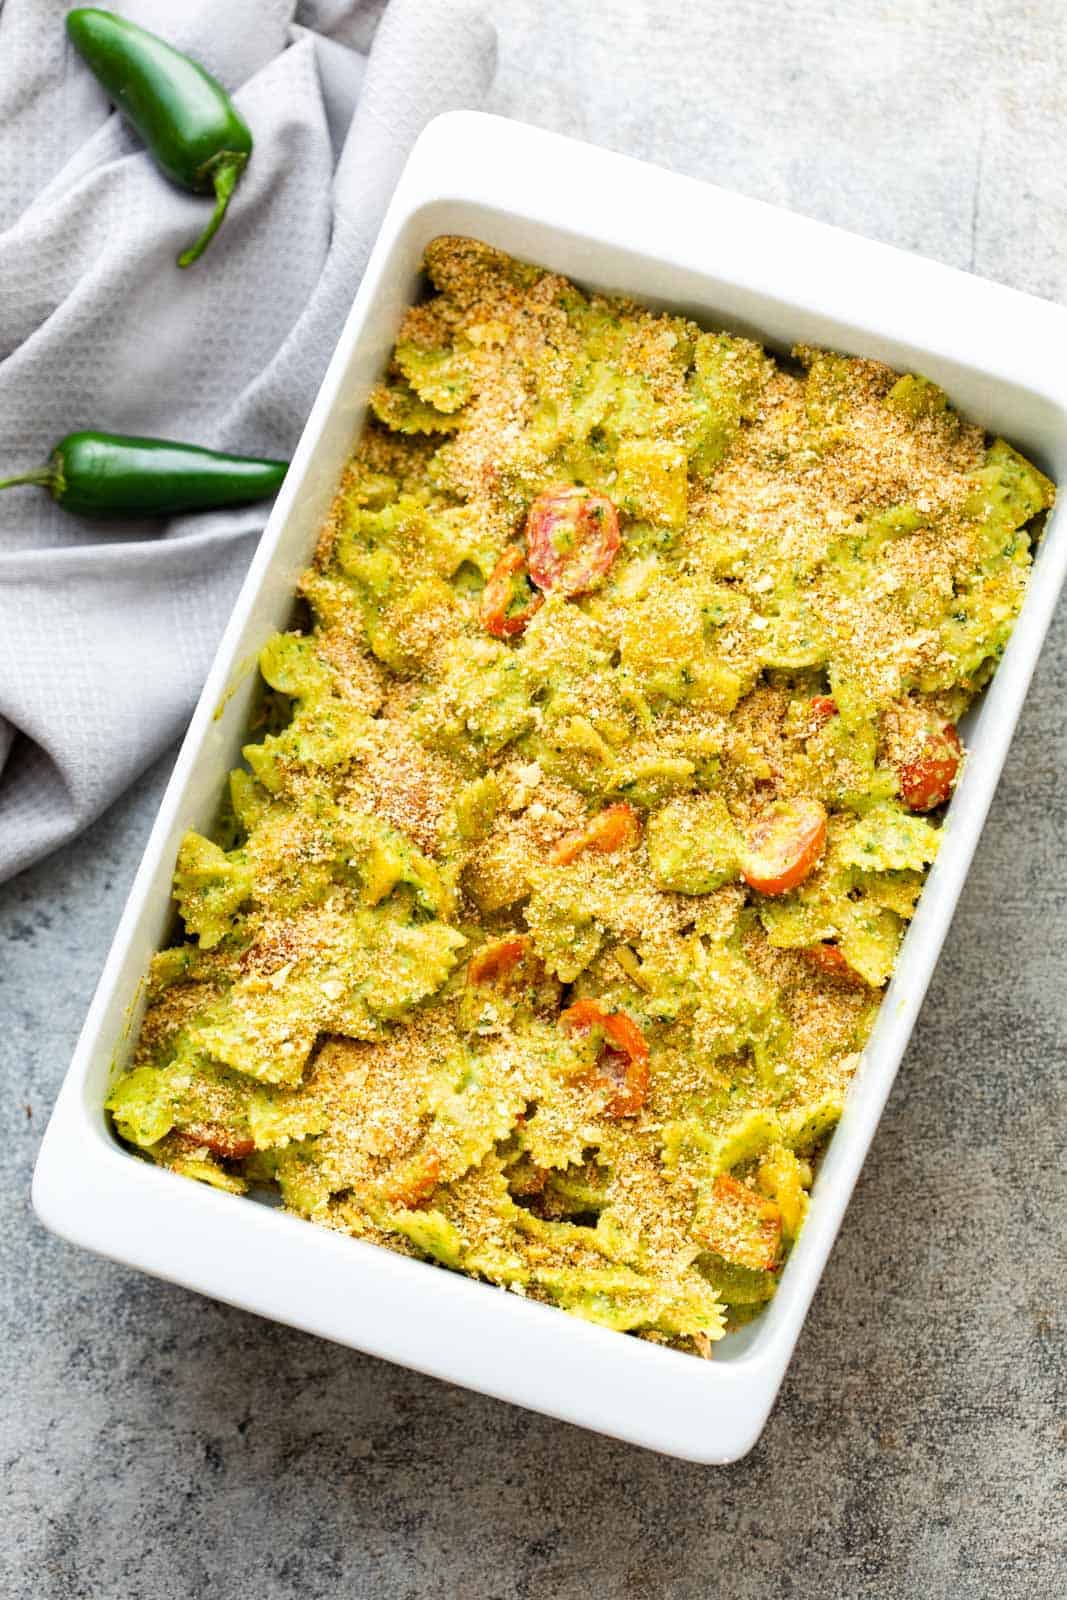 Baked pasta in jalapeno pesto in a white casserole dish straight from the oven